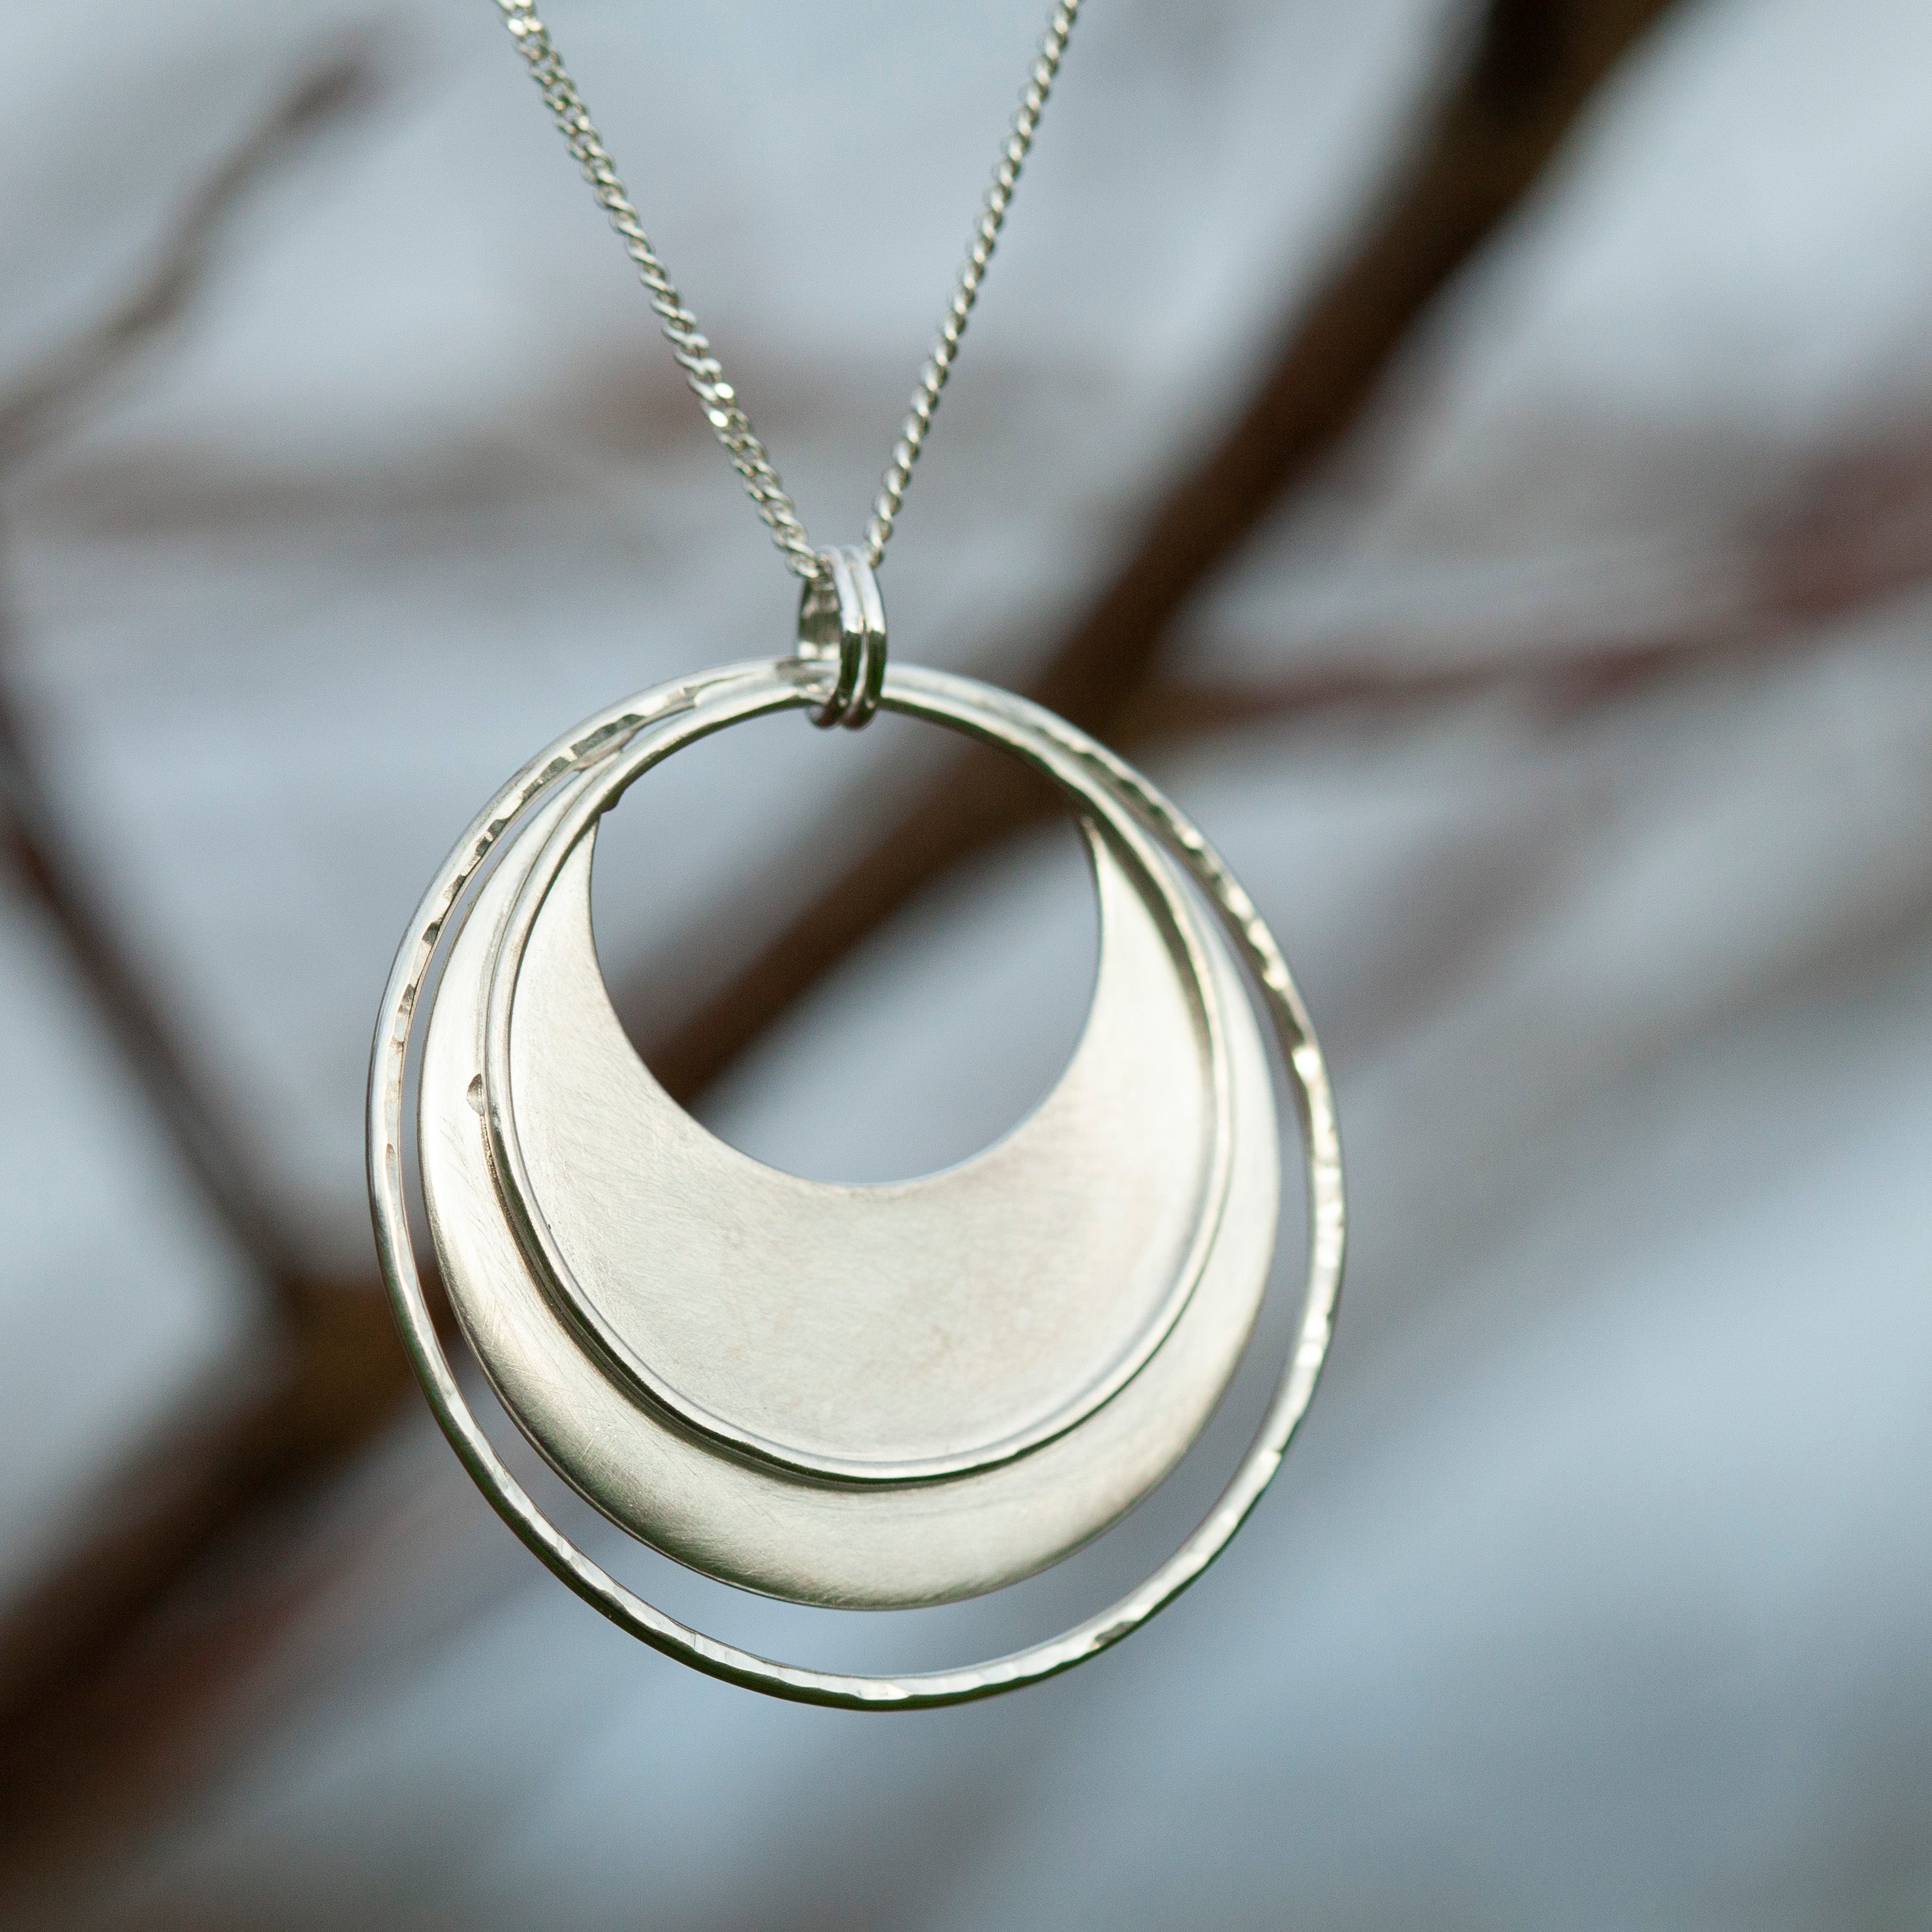 OOAK • Crescent moon pendant in silver #10 (ready to ship)